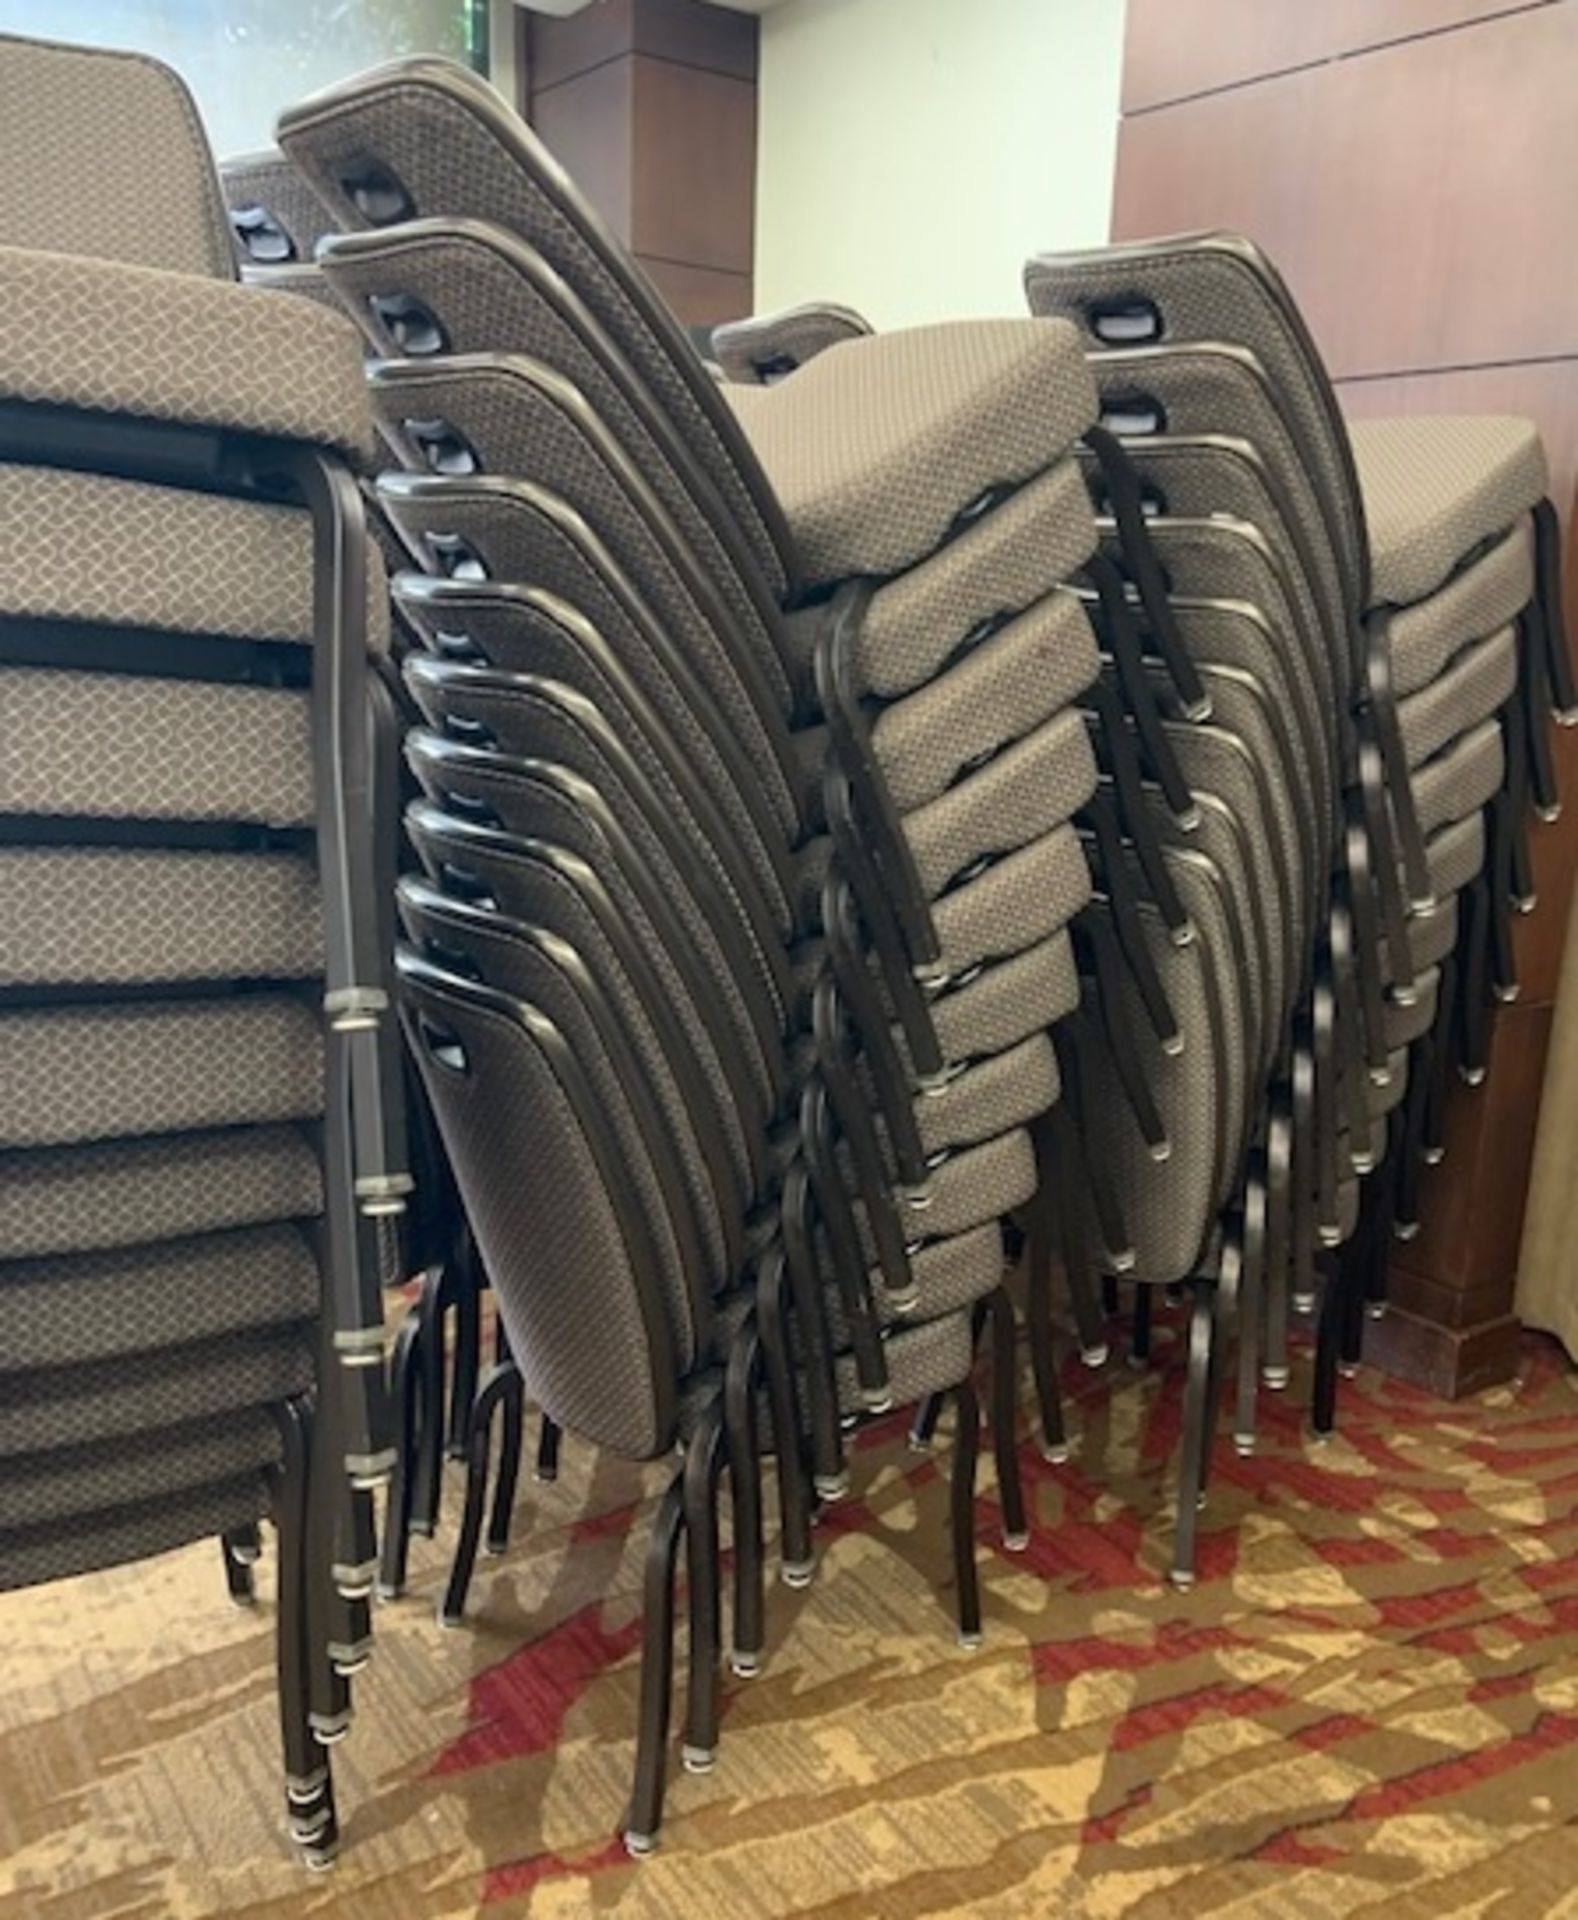 (50)Upholstered Stack Chairs, Location: Auction Room - Image 5 of 5